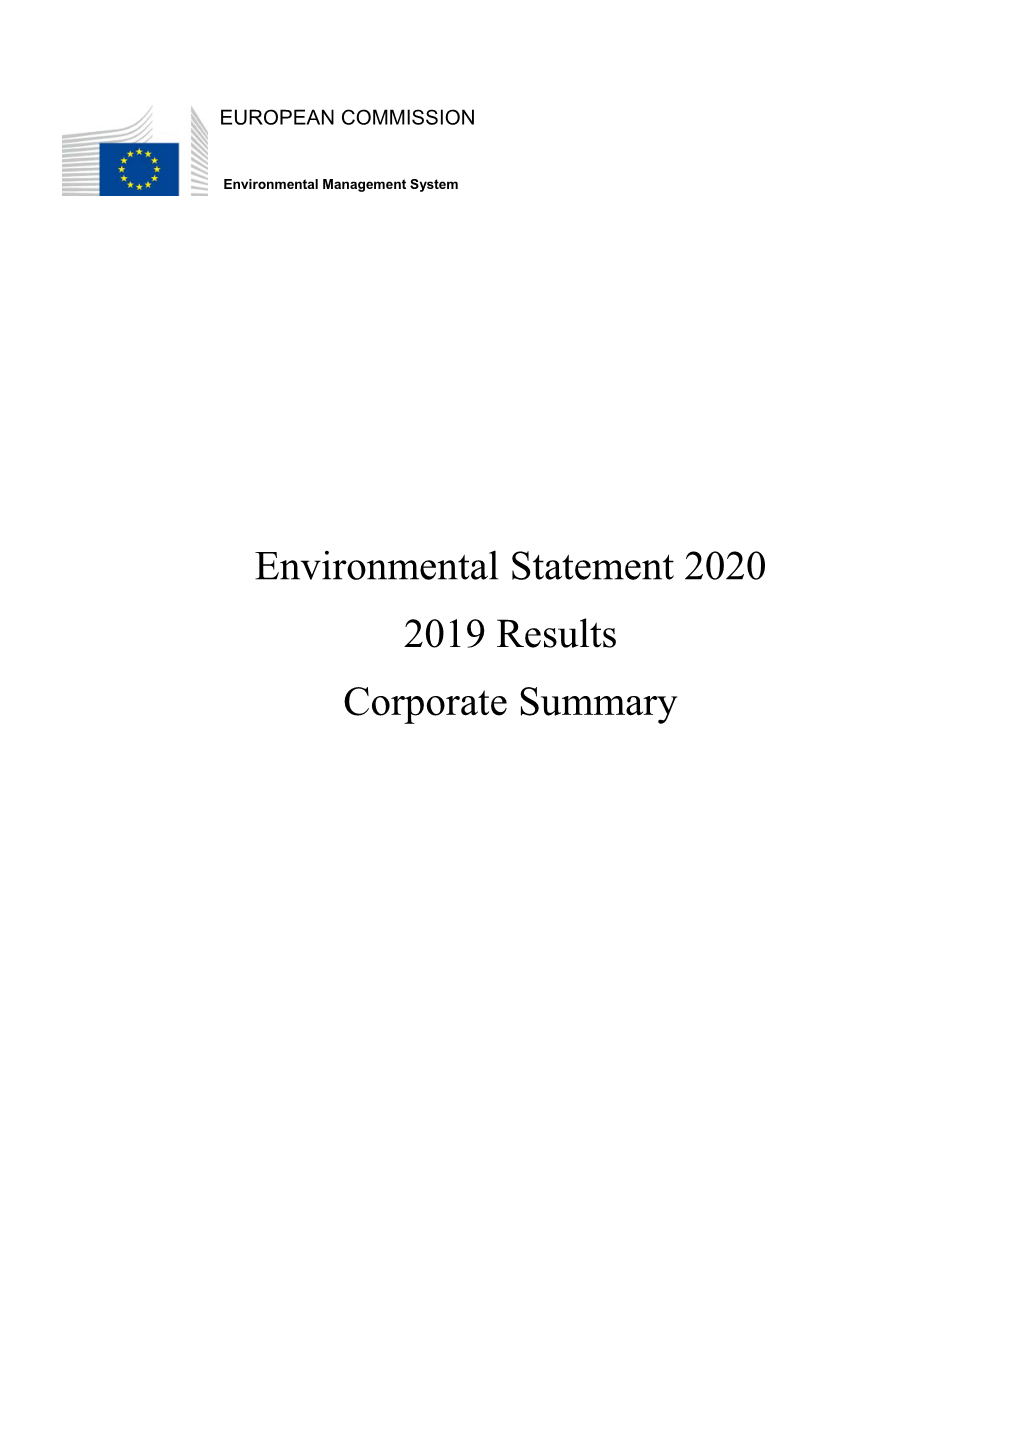 Environmental Statement 2020 2019 Results Corporate Summary